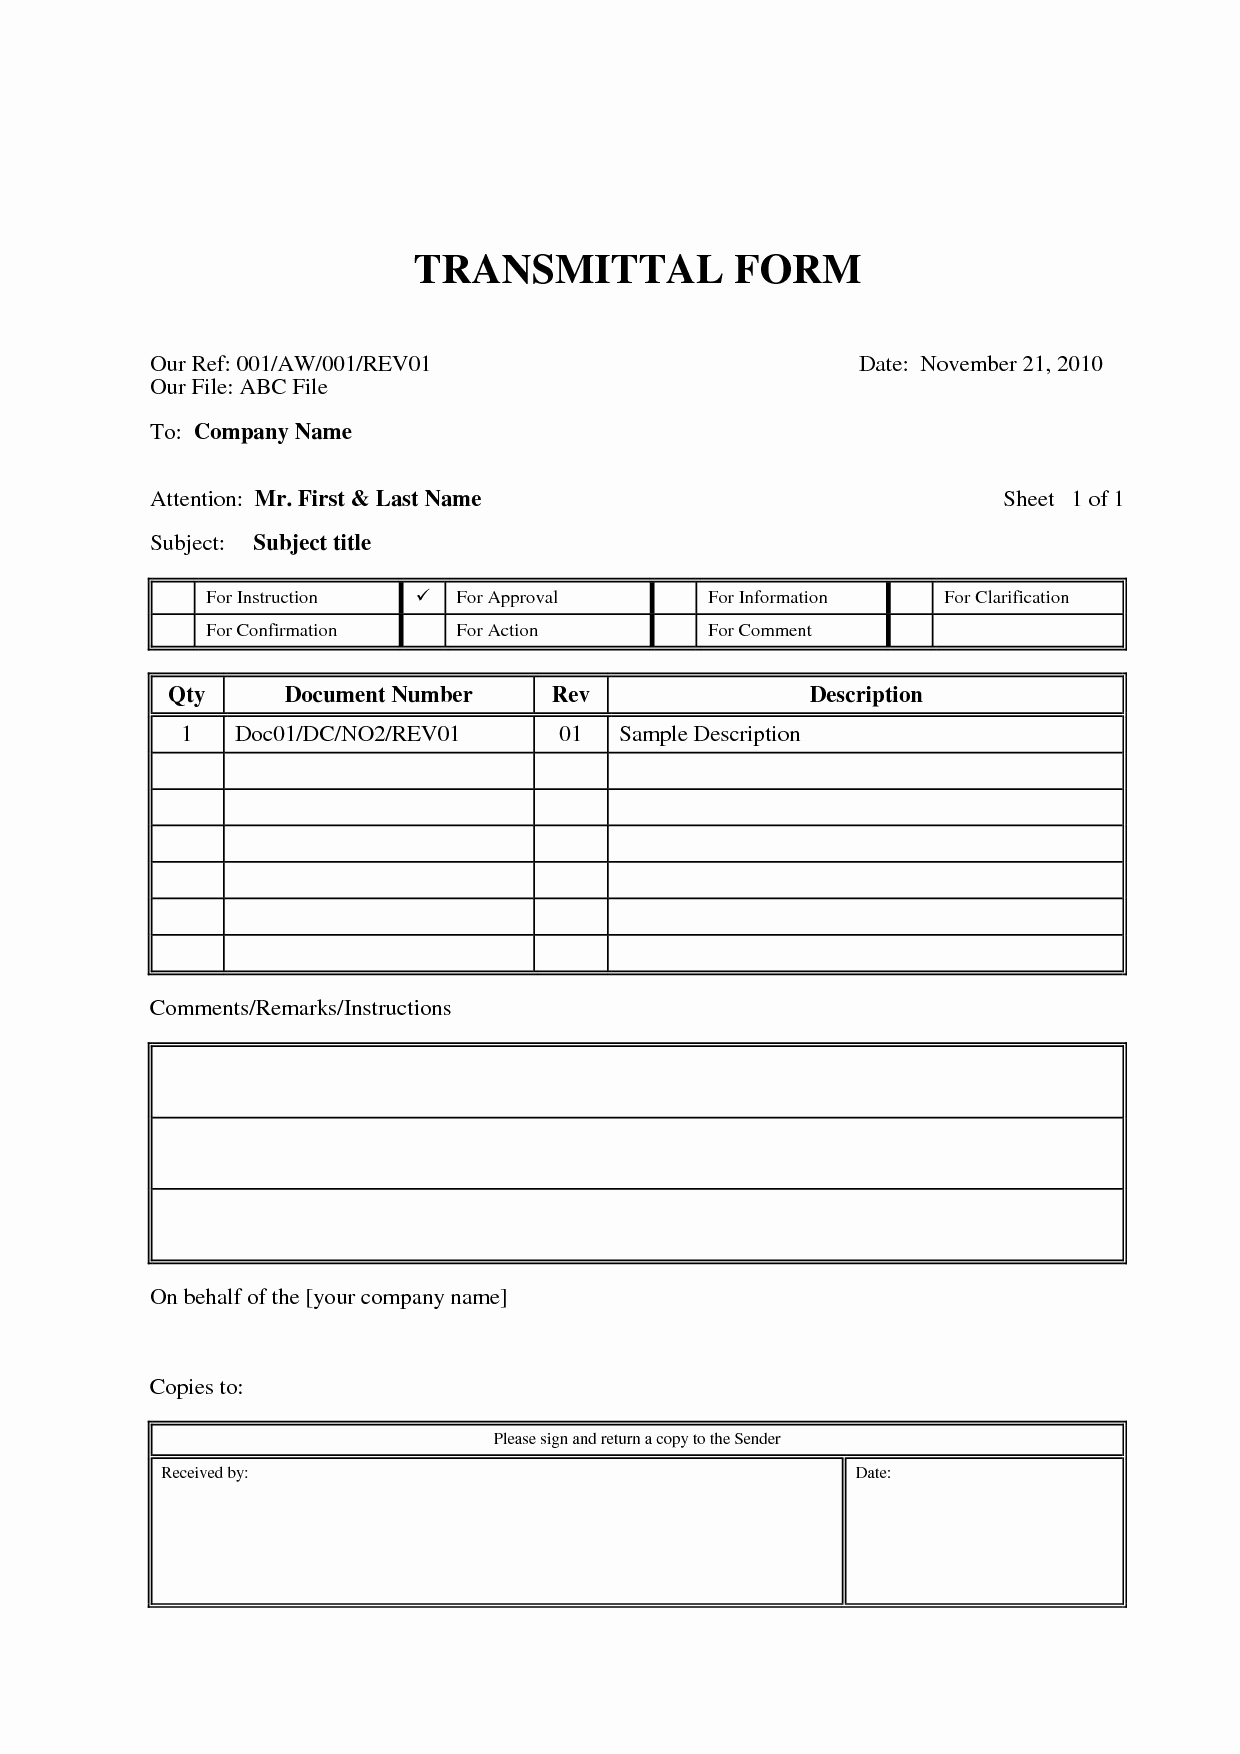 Construction Transmittal form Lovely form Page Template Driverlayer Search Engine